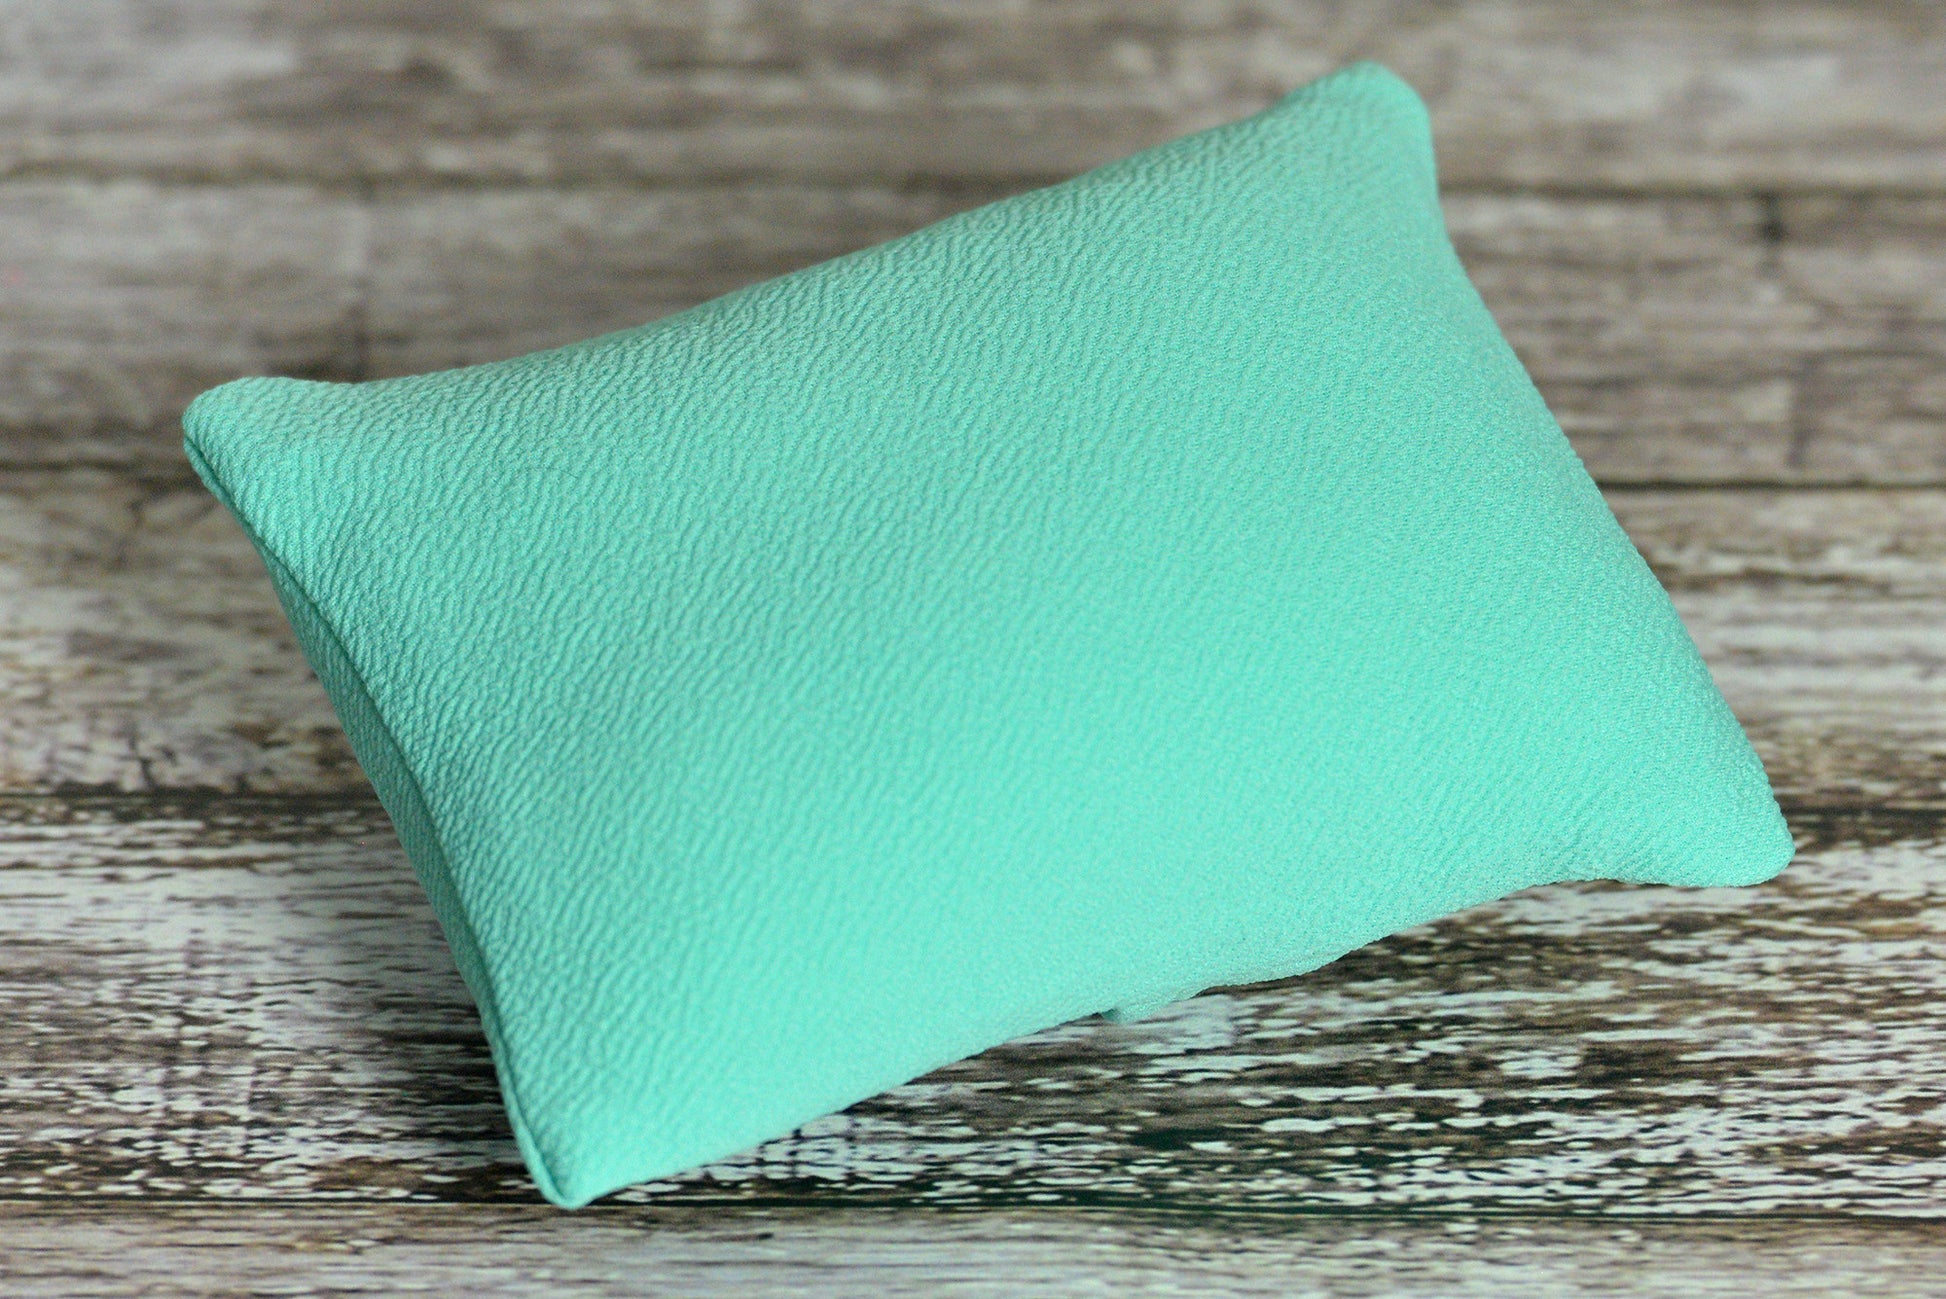 Mini Pillow with Cover - Textured - Mint-Newborn Photography Props